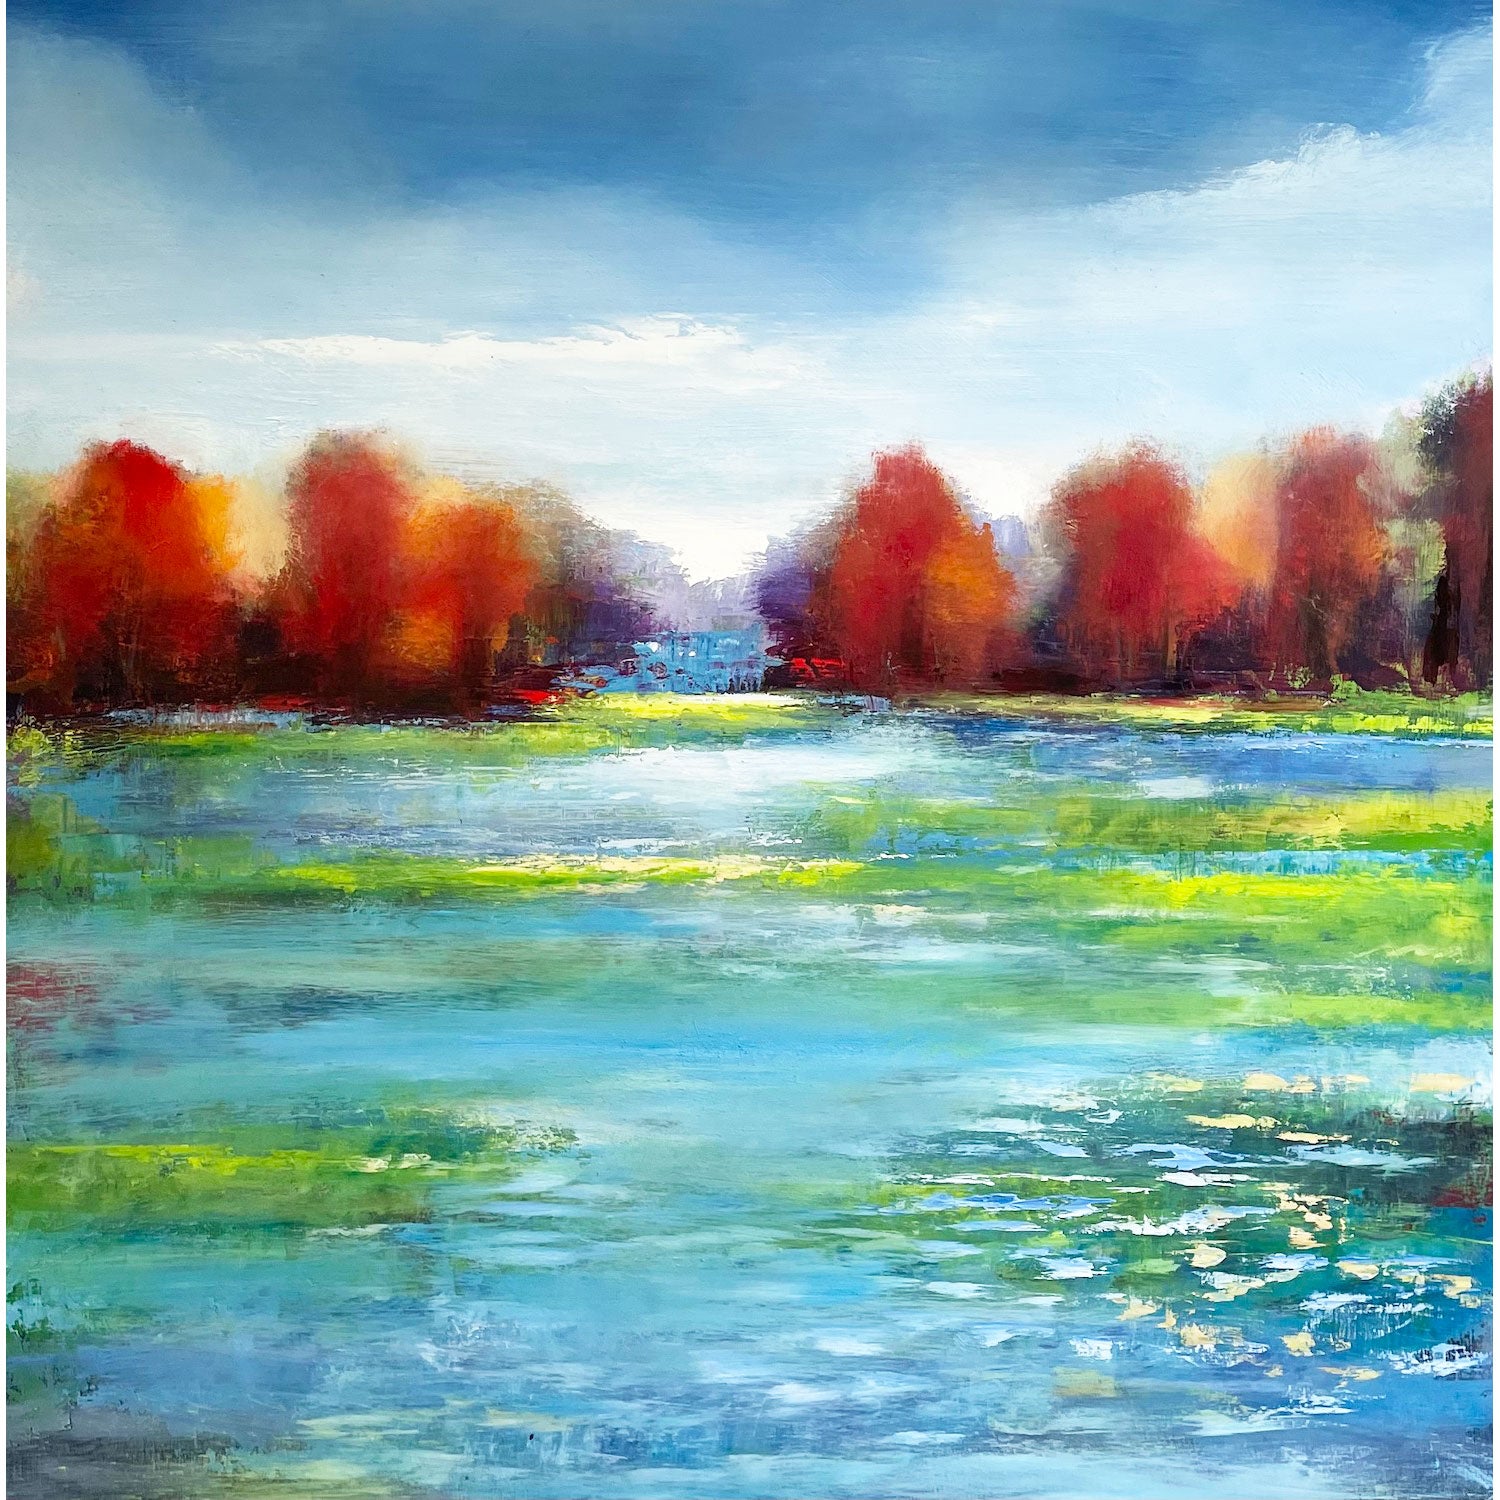 Paul Chester - Shallow Waters, 36" x 36"